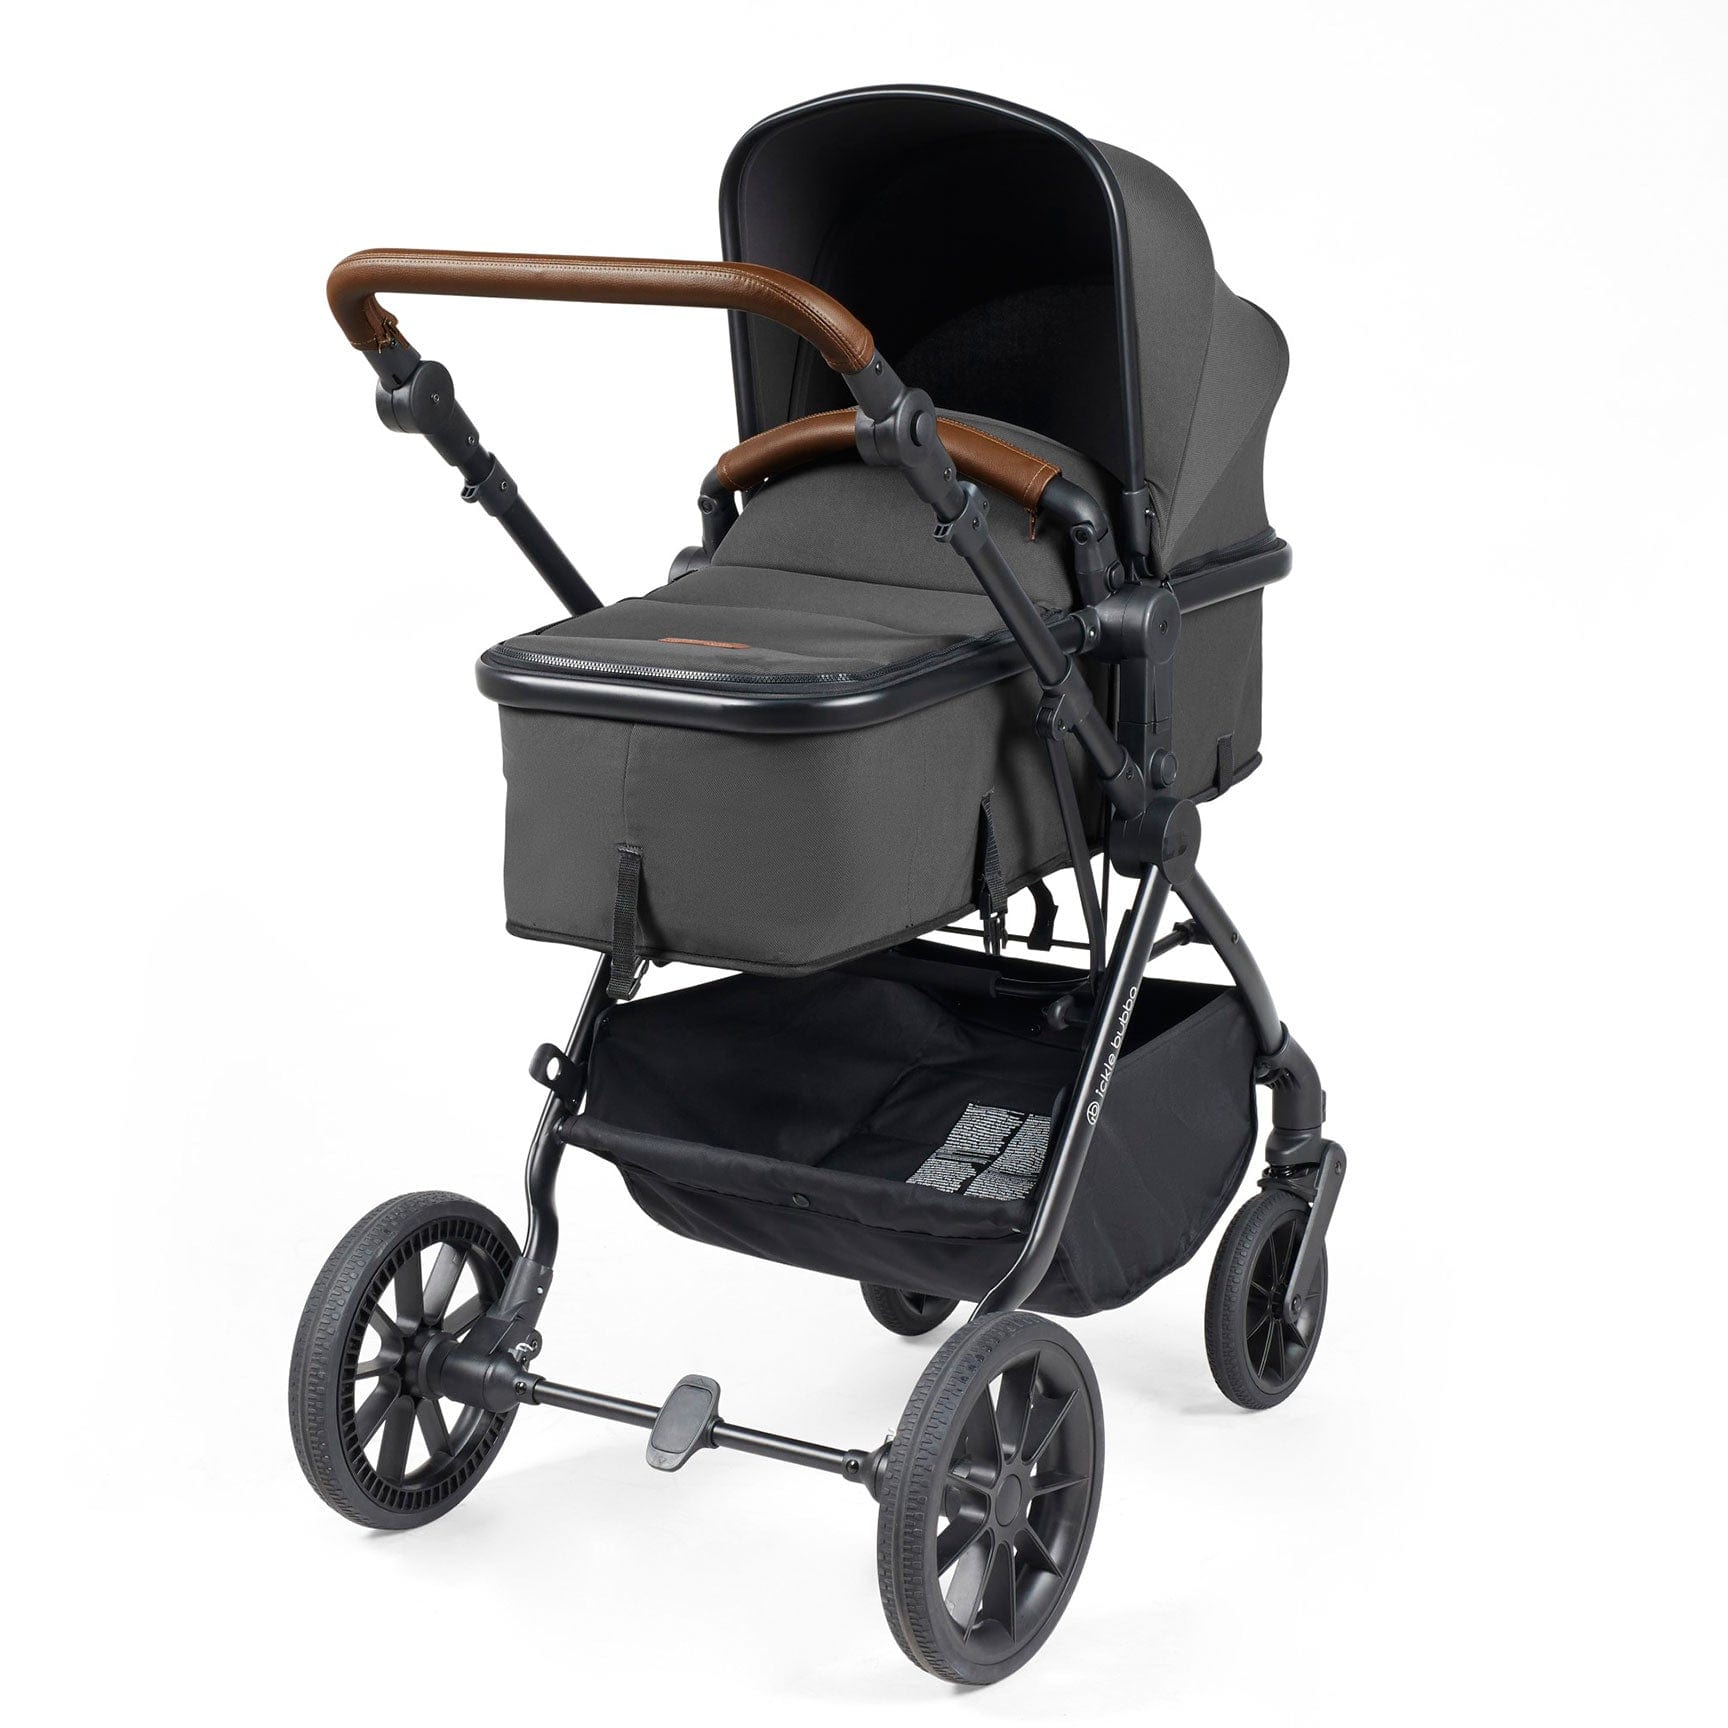 Ickle Bubba travel systems Ickle Bubba Cosmo 2 in 1 Plus Carrycot & Pushchair - Black/Graphite Grey 10-007-001-007